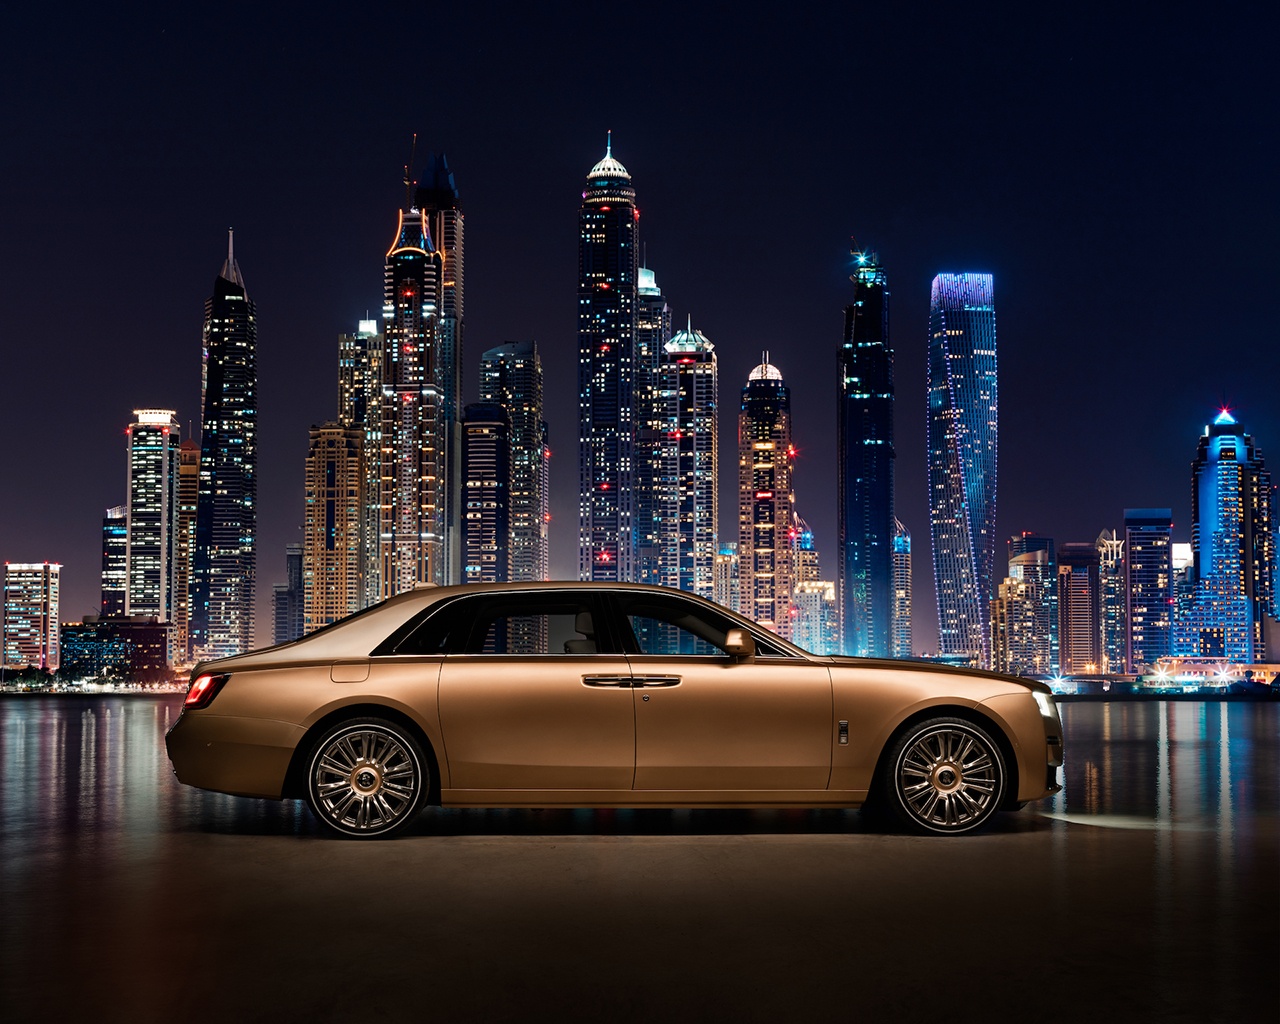 ROLLS-ROYCE GHOST EXTENDED: A WORK OF ART FROM THE PRIVATE OFFICE DUBAI